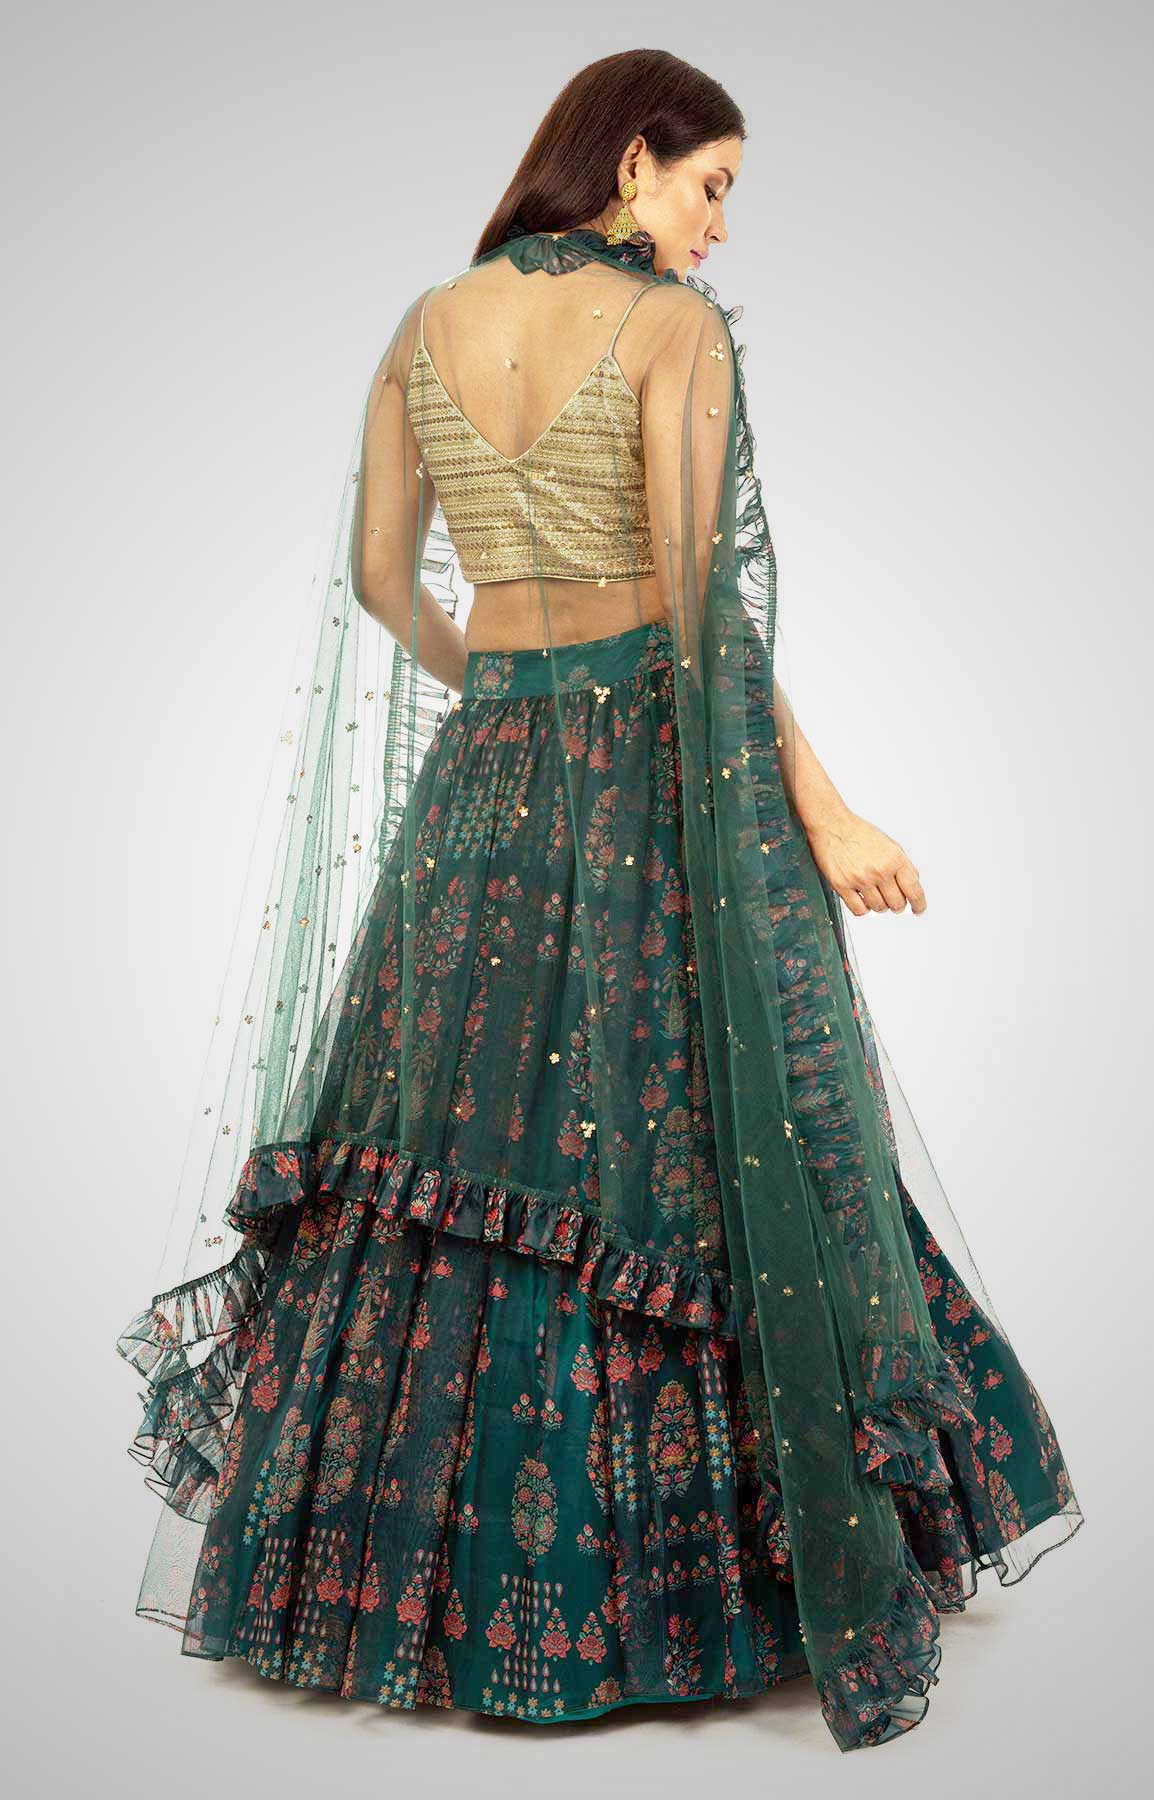 Bottle Green Floral Print Skirt With Sequin Top And Frilled Dupatta – Viraaya By Ushnakmals